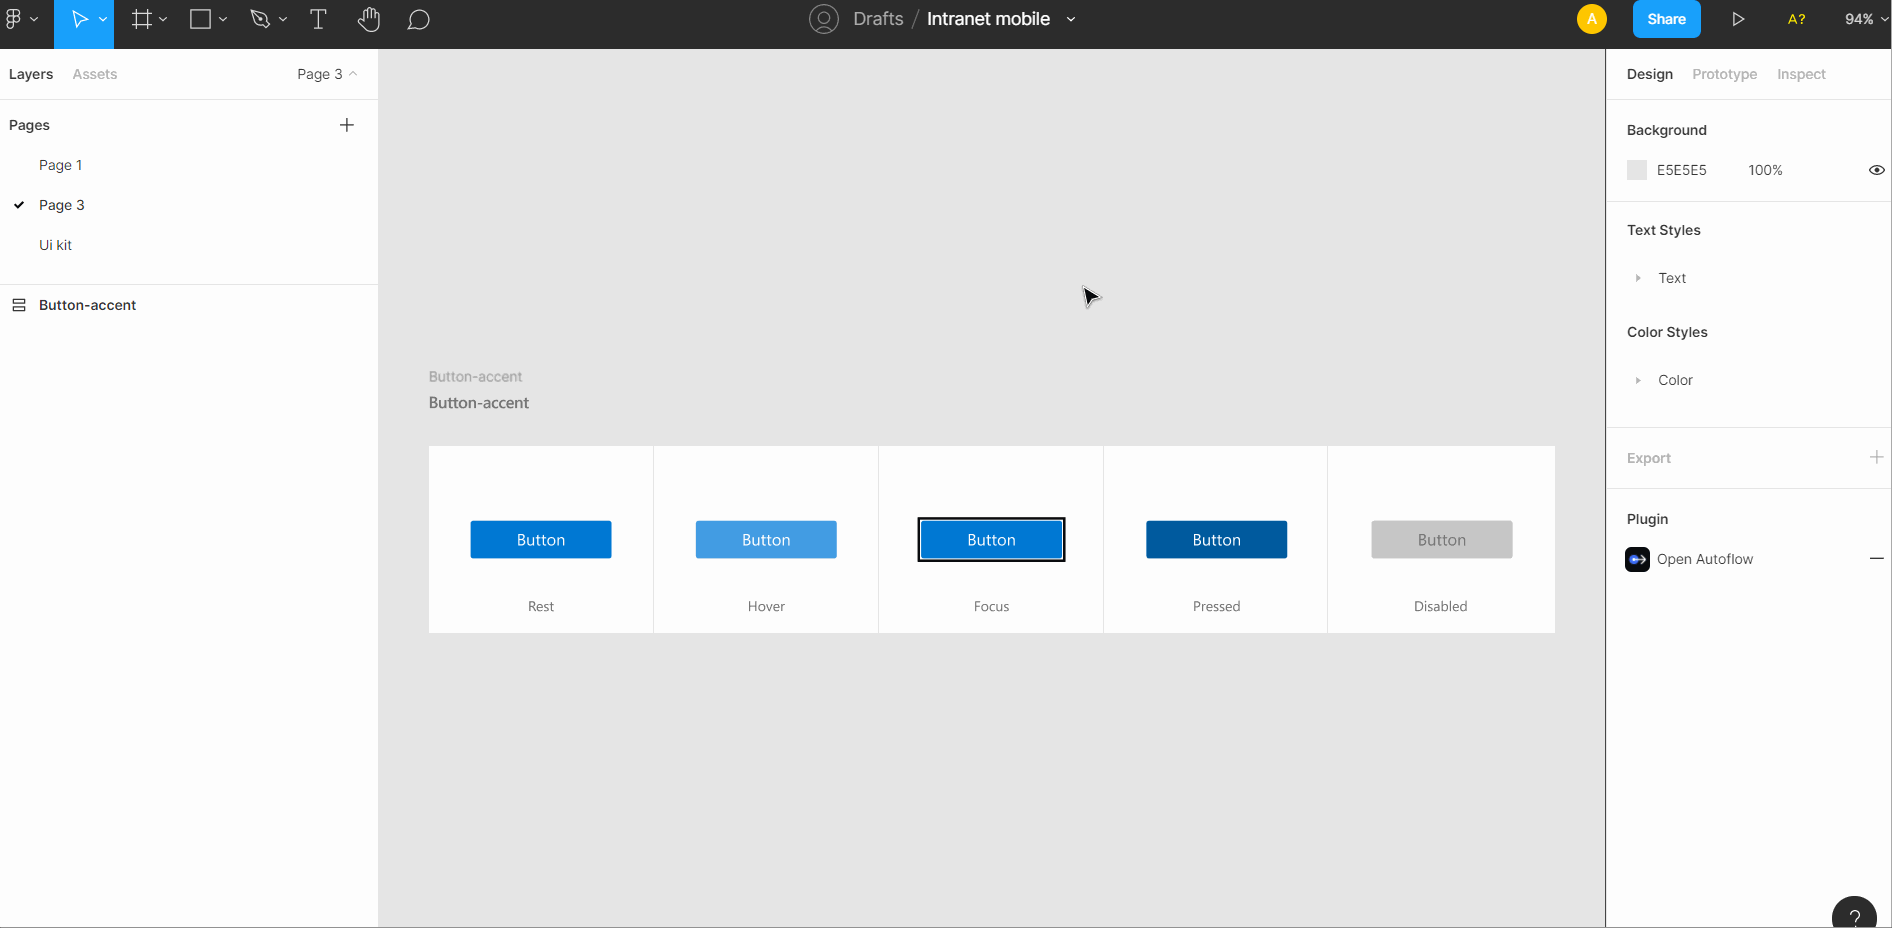 Version history in Figma